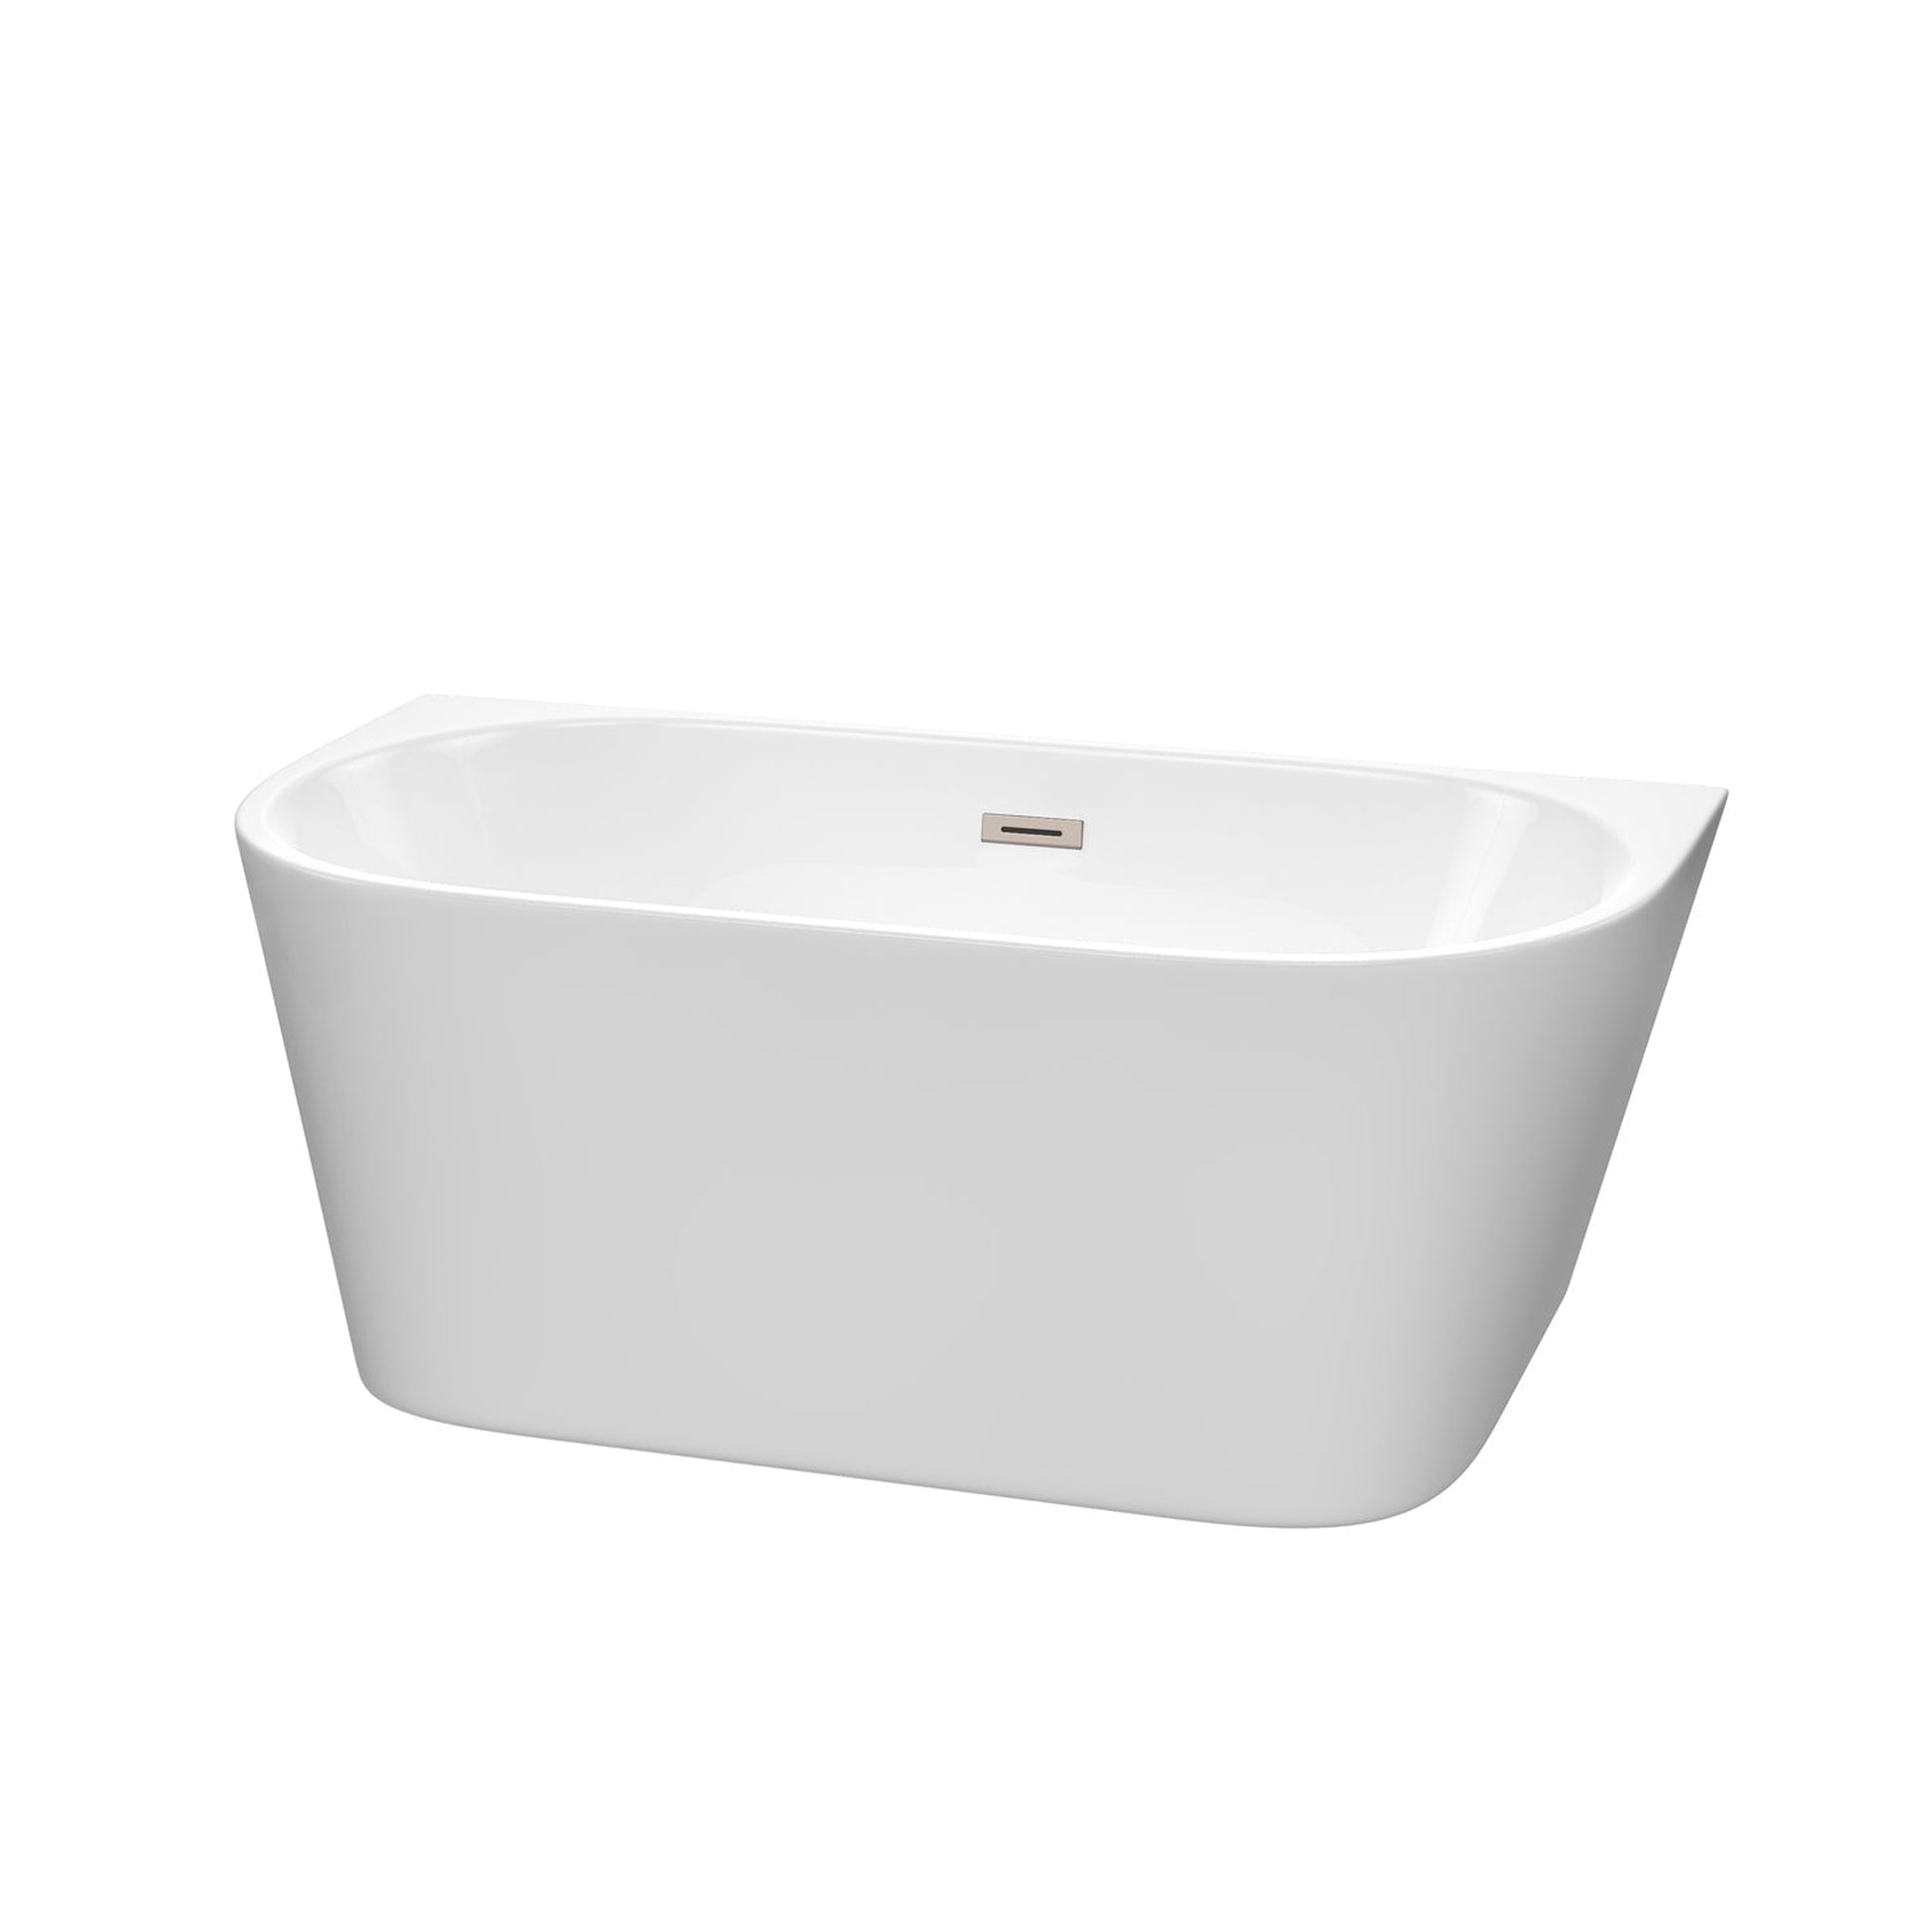 Wyndham Collection Callie 59" Freestanding Bathtub in White With Brushed Nickel Drain and Overflow Trim